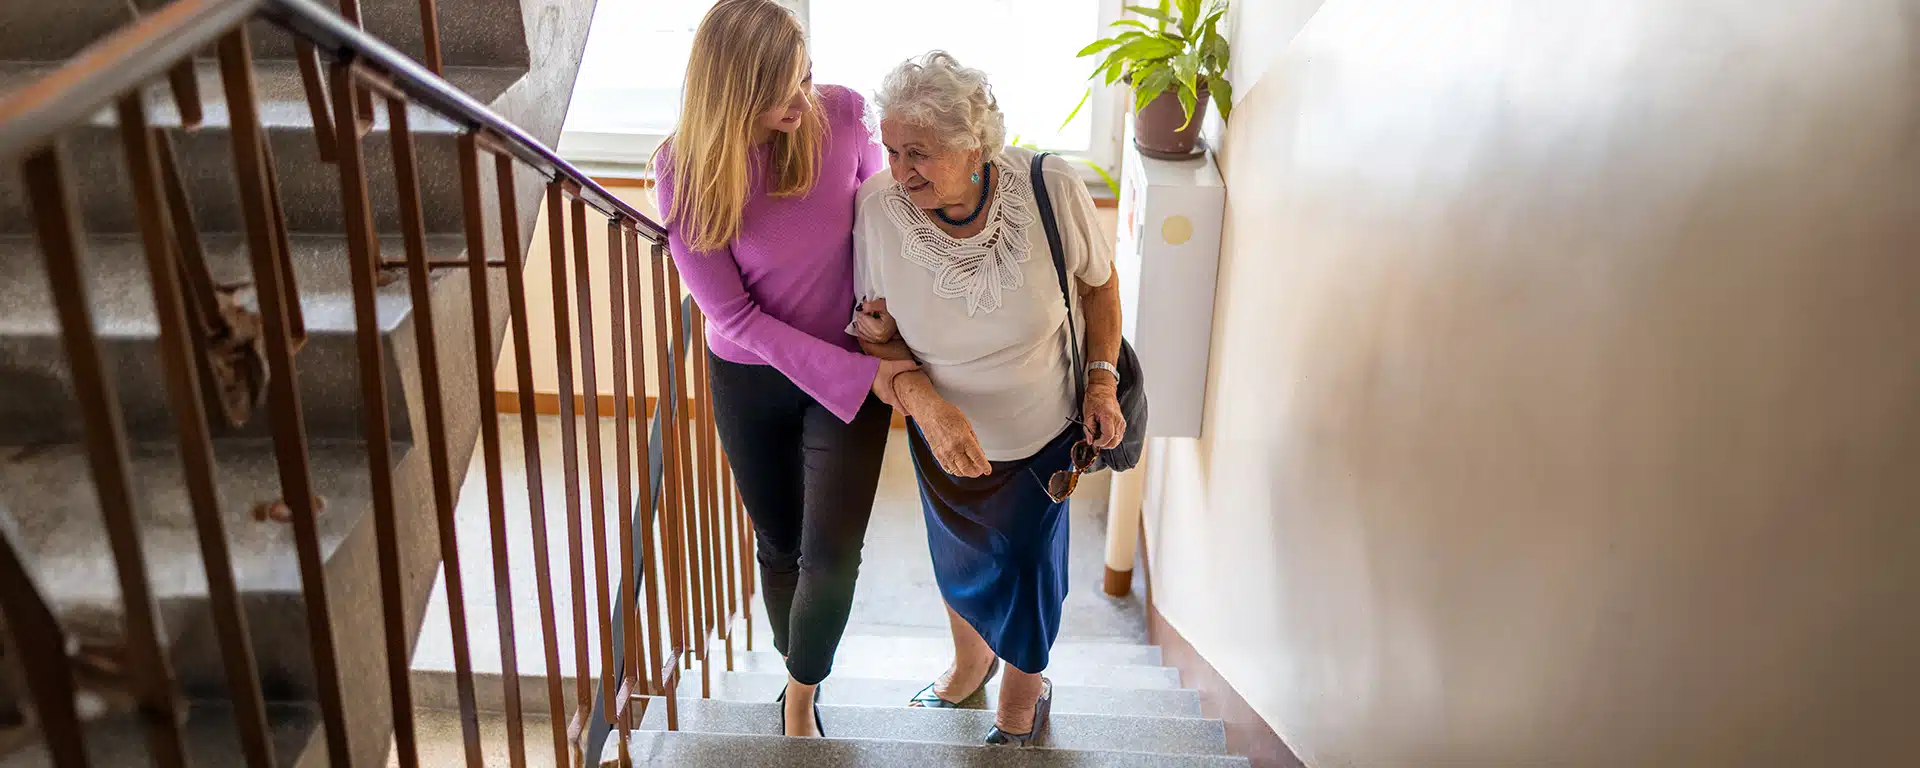 A young woman helps a senior woman up the stairs.